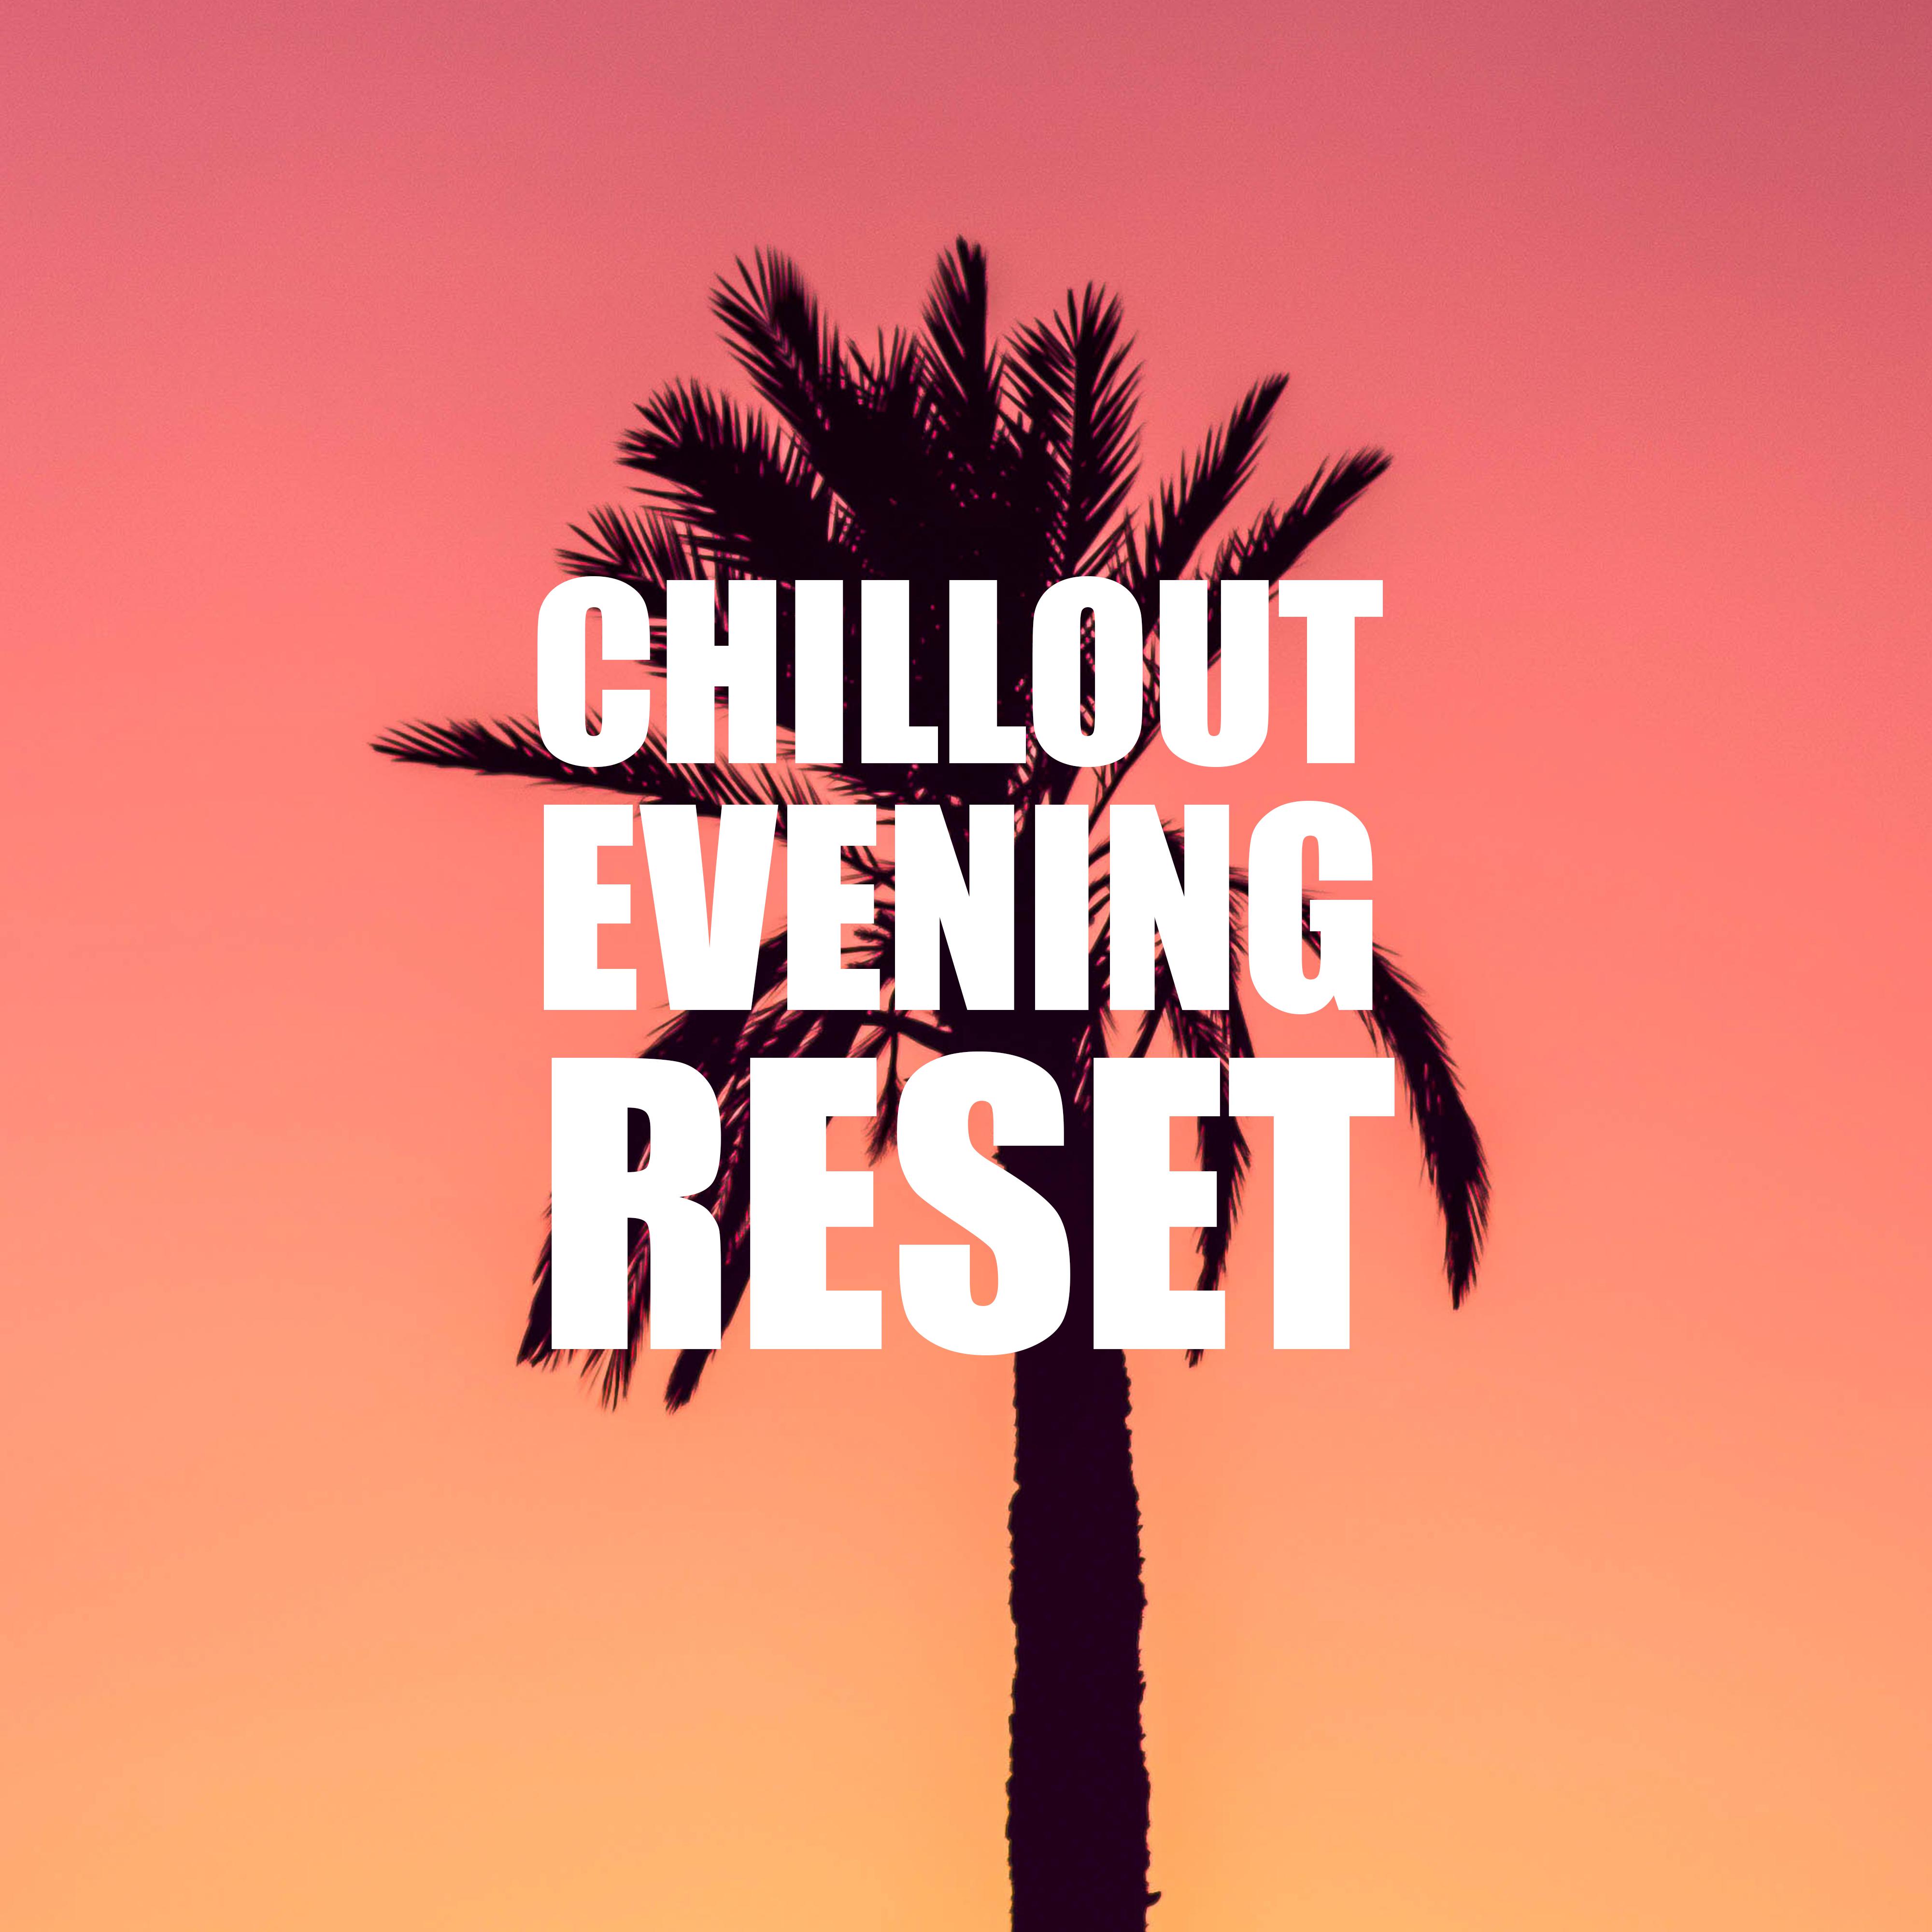 Chillout Evening Reset: Selection of 15 Electronic Beats for After Work Relax & Chill Out Party with Friends, Hot Vibes, Deep Chill Lounge